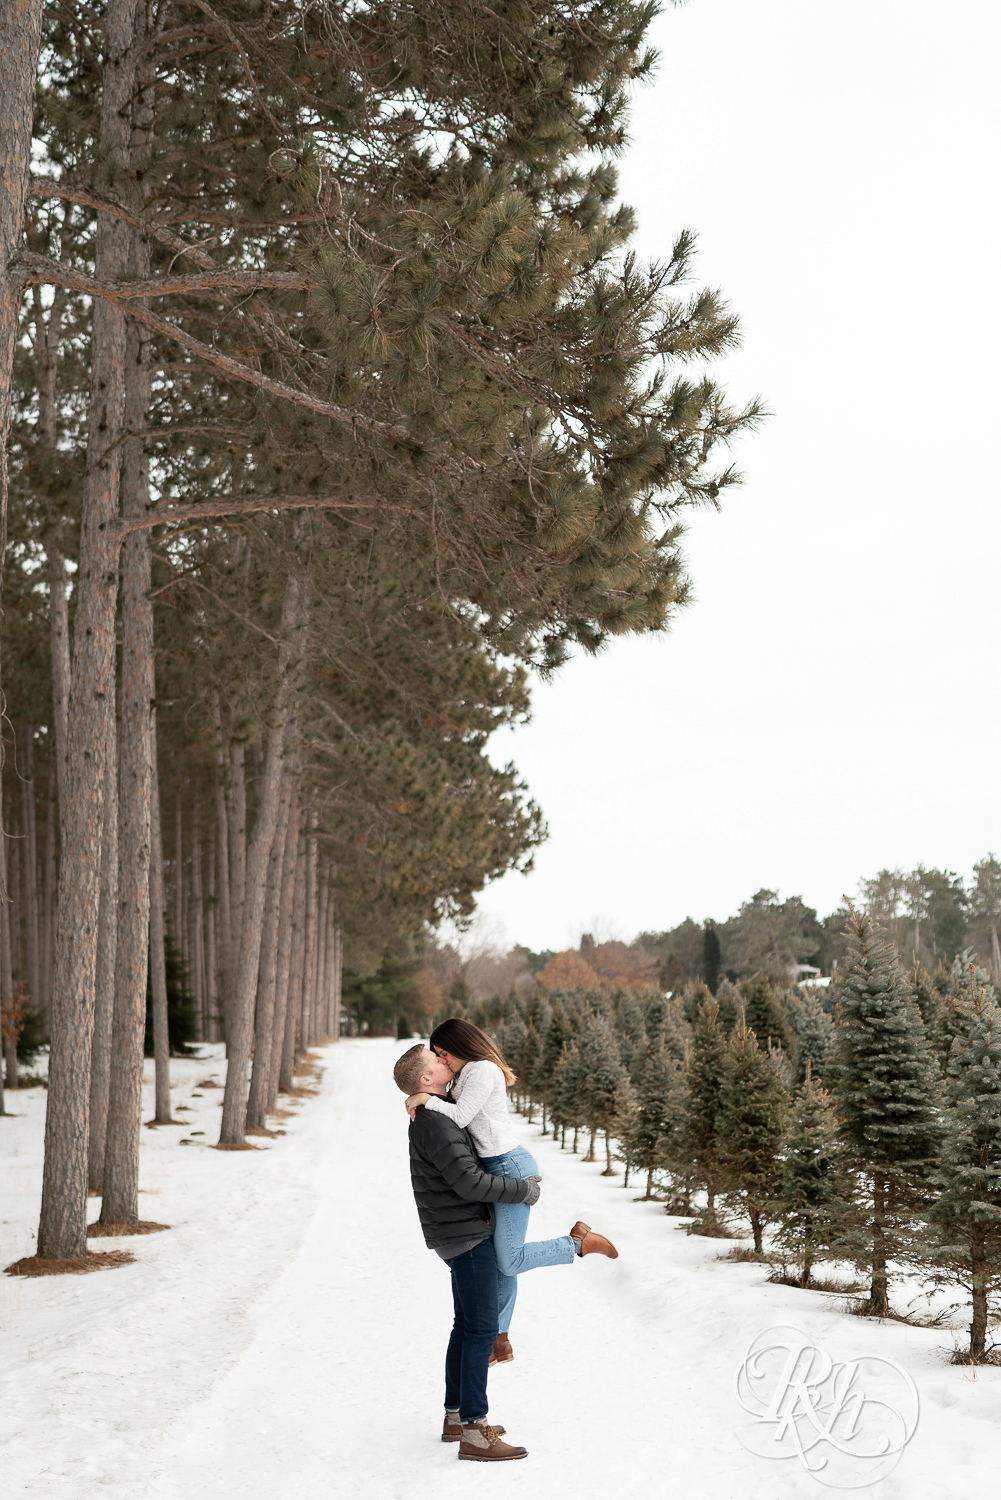 Man lifting and kissing woman in between pine trees in the snow at Hansen Tree Farm in Anoka, Minnesota.